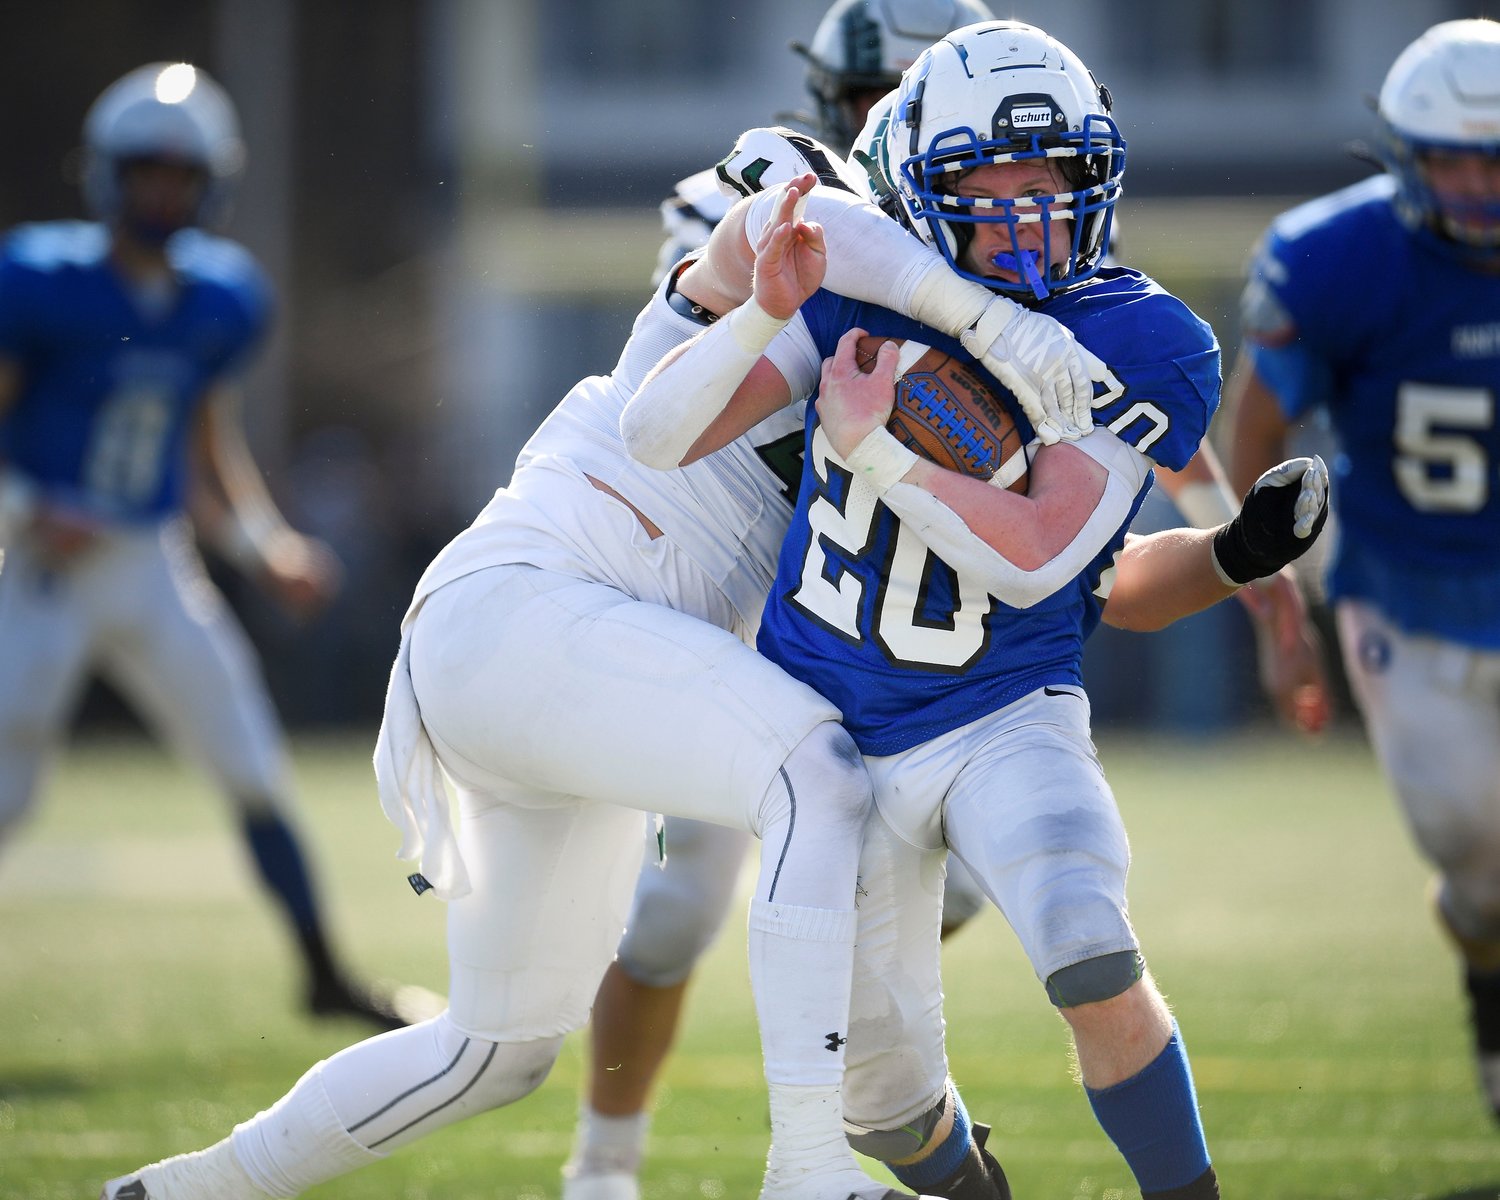 Quakertown’s Gavin Carroll cuts upfield during the third quarter and is tackled by Pennridge’s Hunter Burdick.